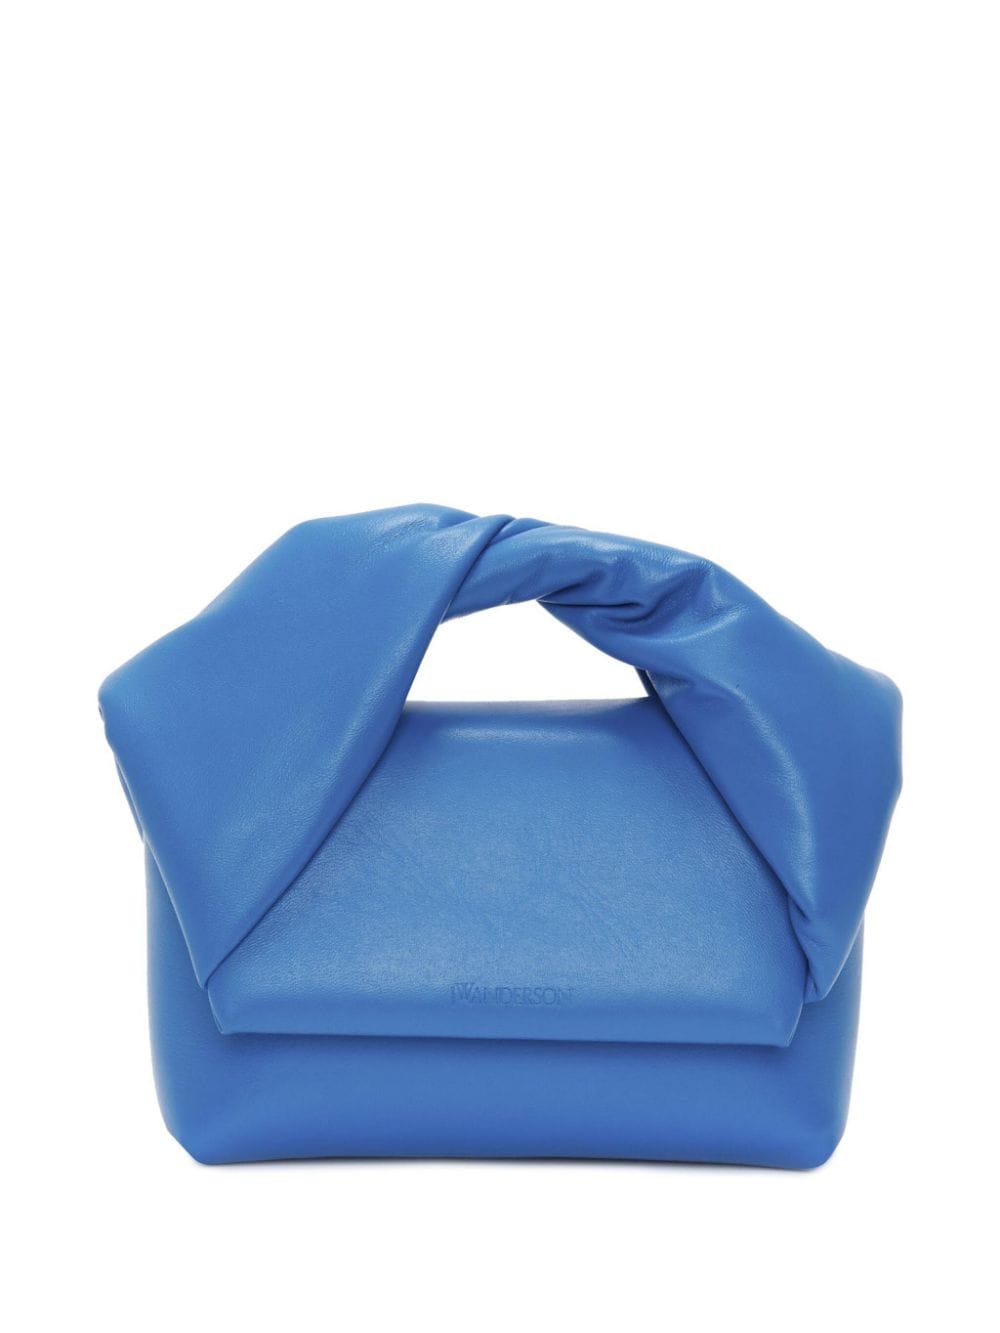 JW Anderson small Twister leather tote bag - Blue von JW Anderson